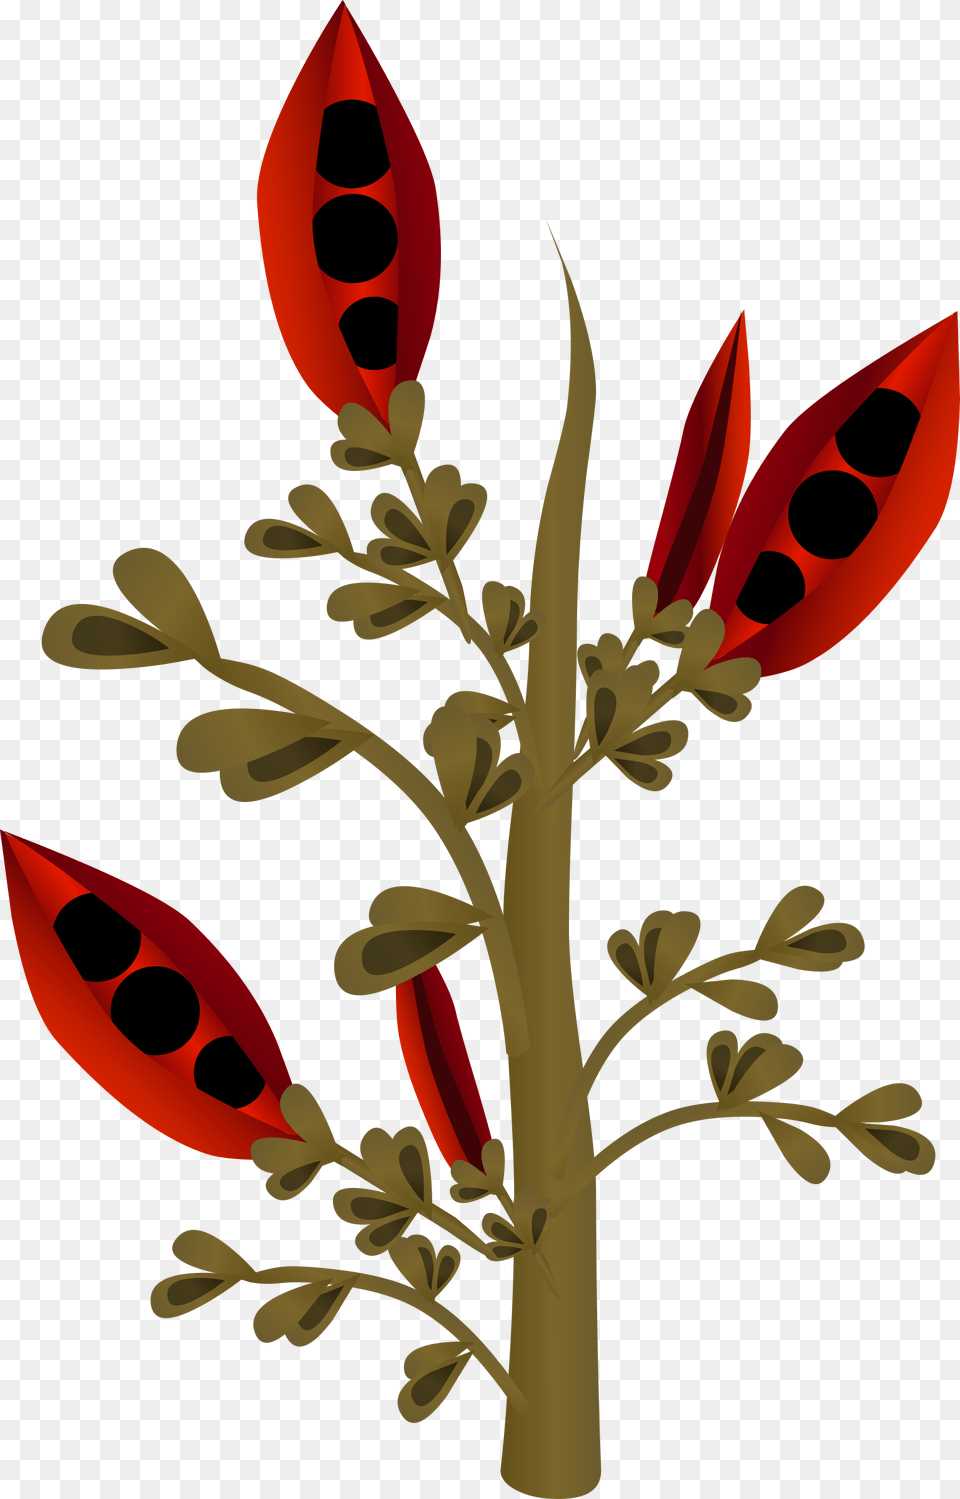 This Free Icons Design Of Firebog Firebean Plants, Art, Floral Design, Graphics, Leaf Png Image